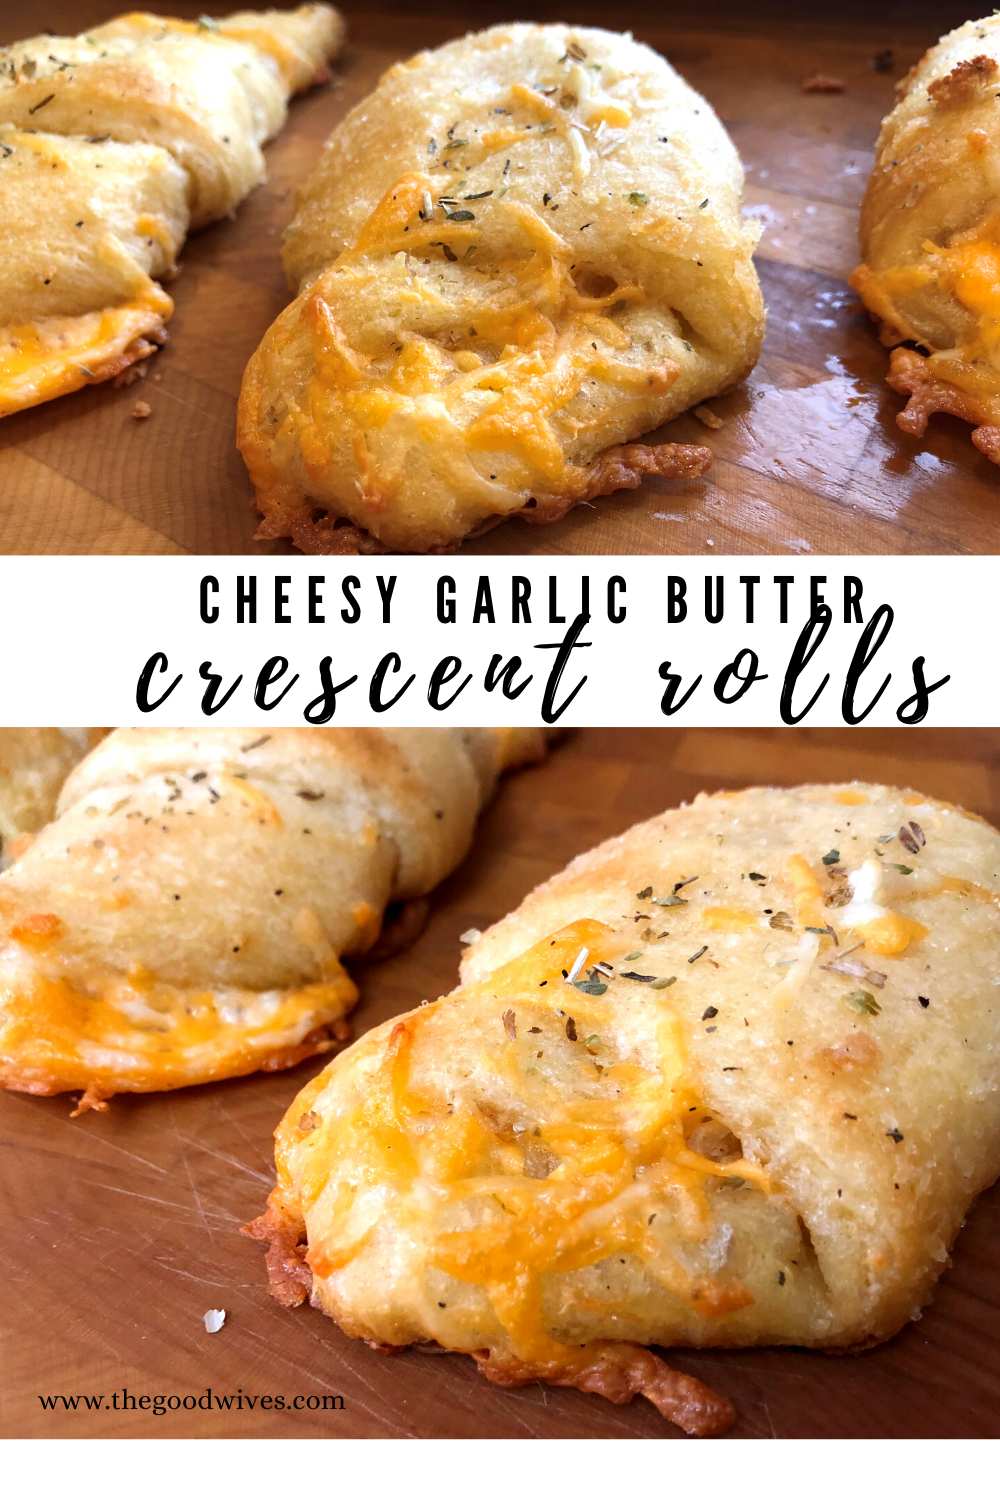 Cheesy Crescent Rolls  Flaky, cheesy rolls - ready in just 20 minutes!